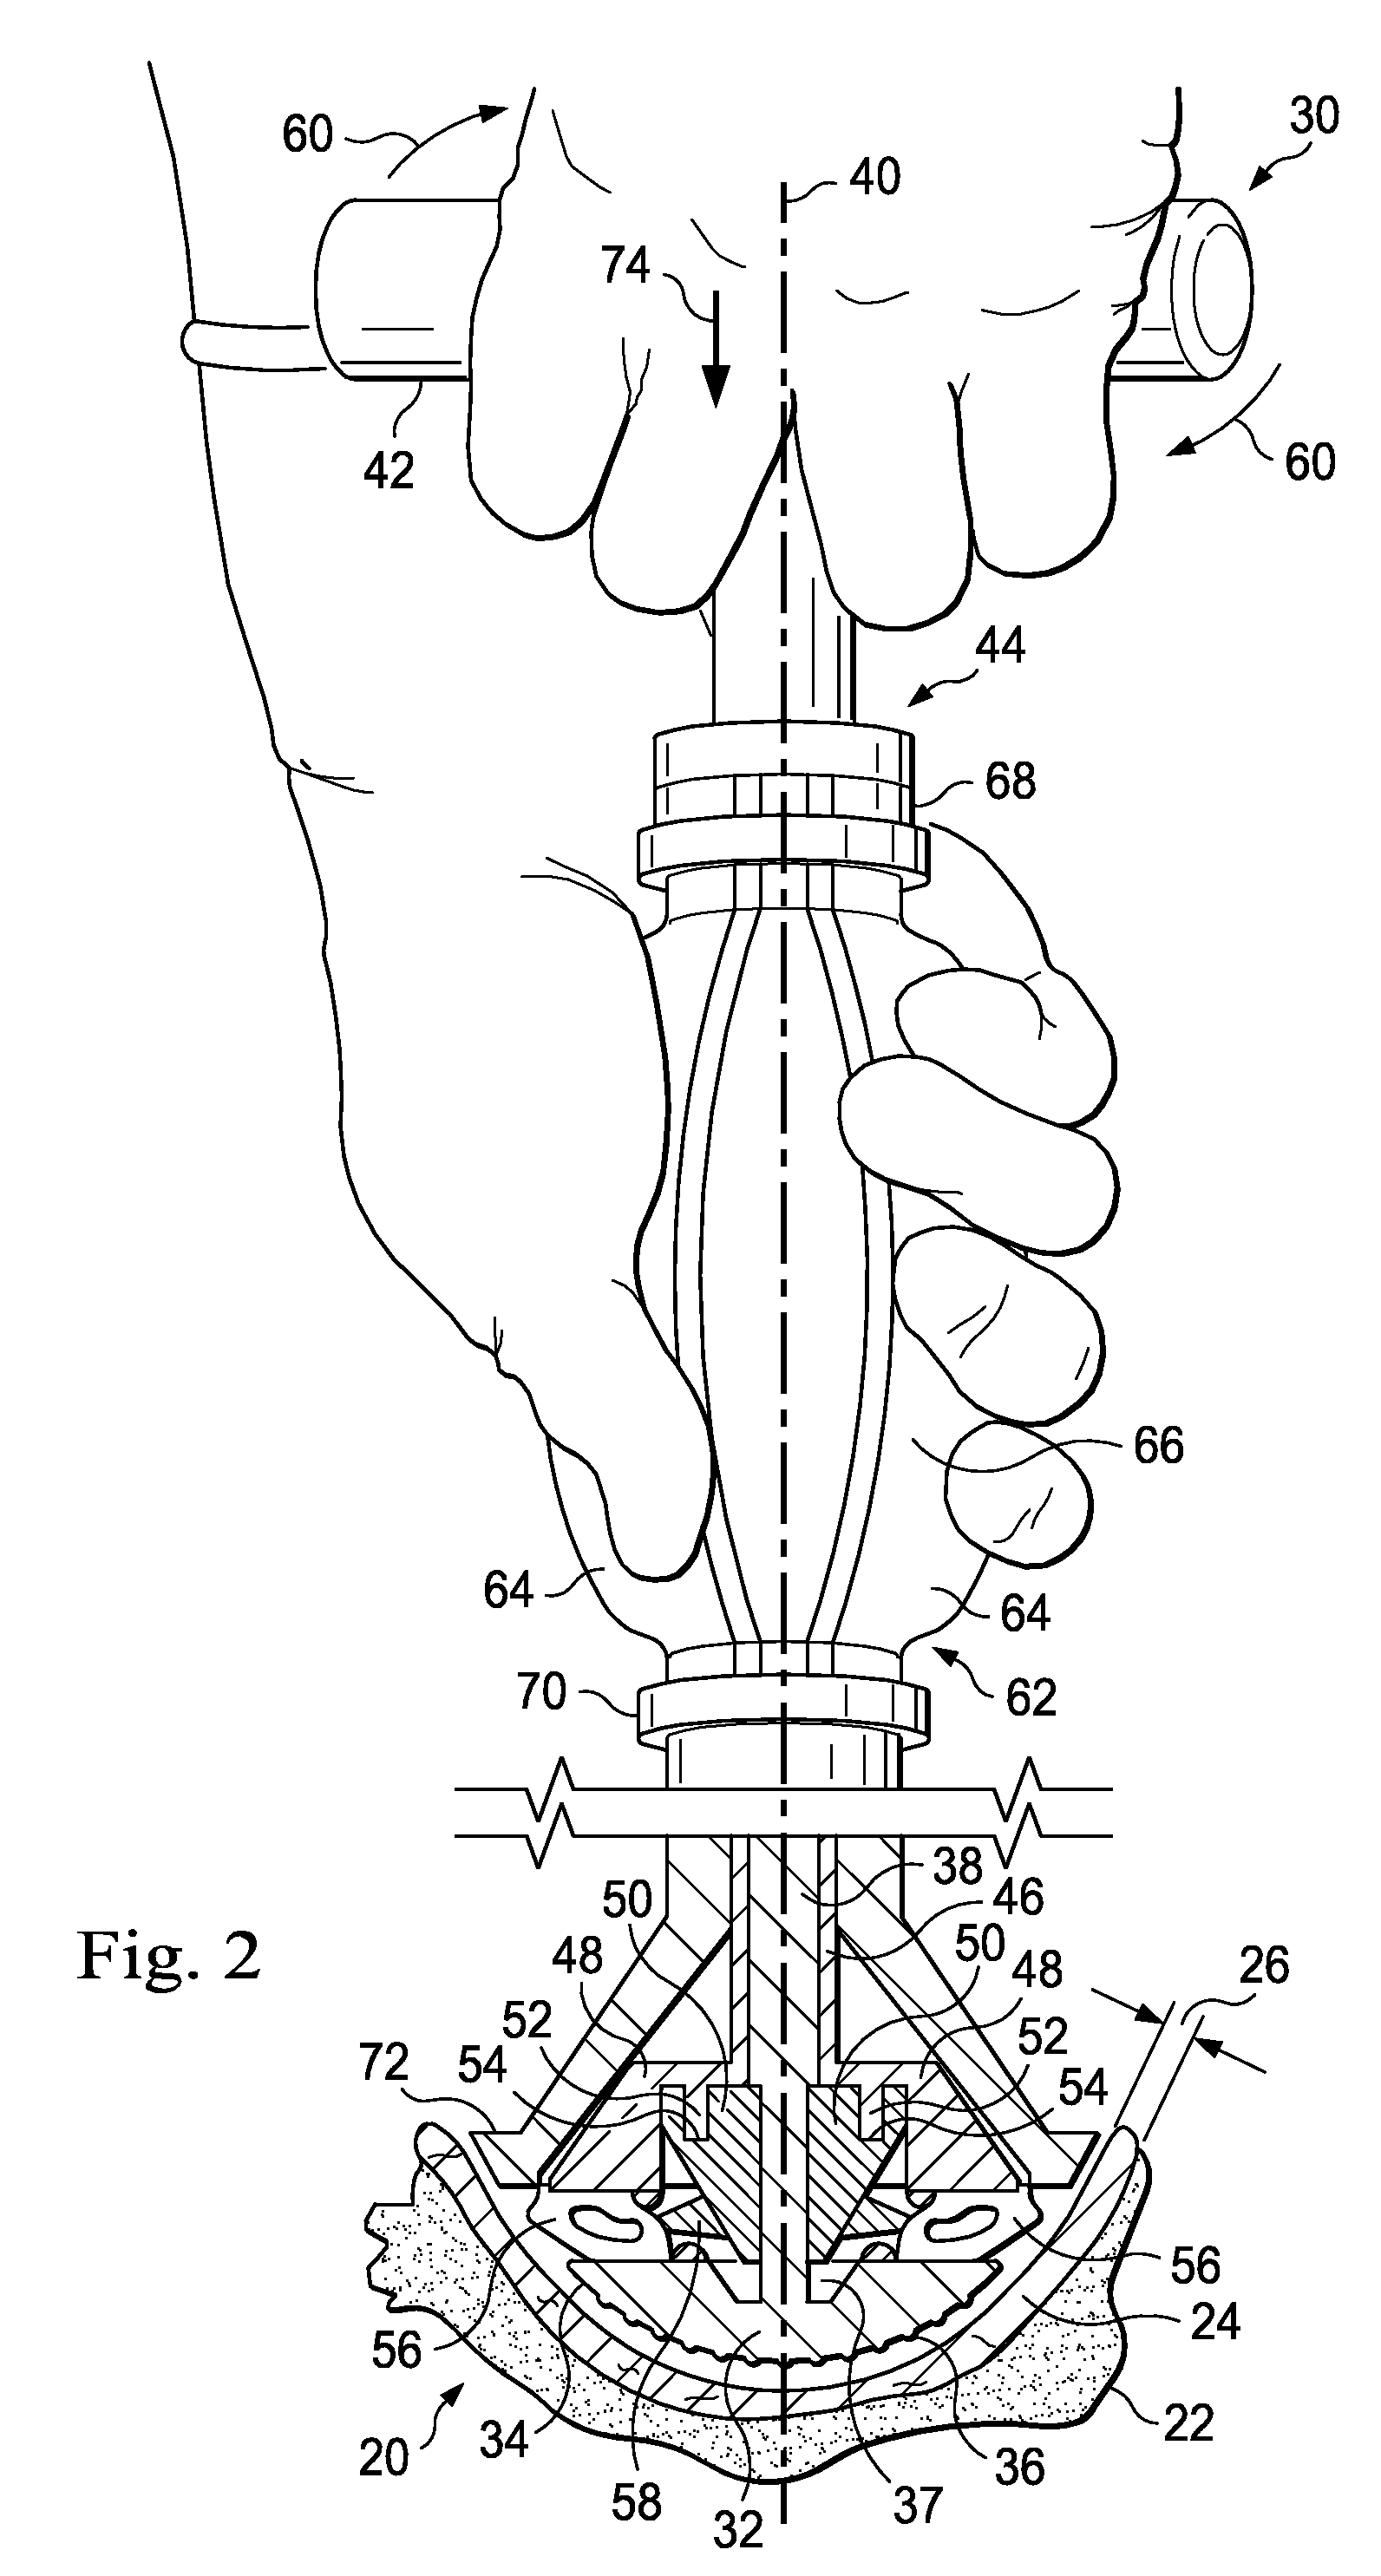 Methods, Systems, and Apparatus for Implanting Prosthetic Devices Into Cartilage